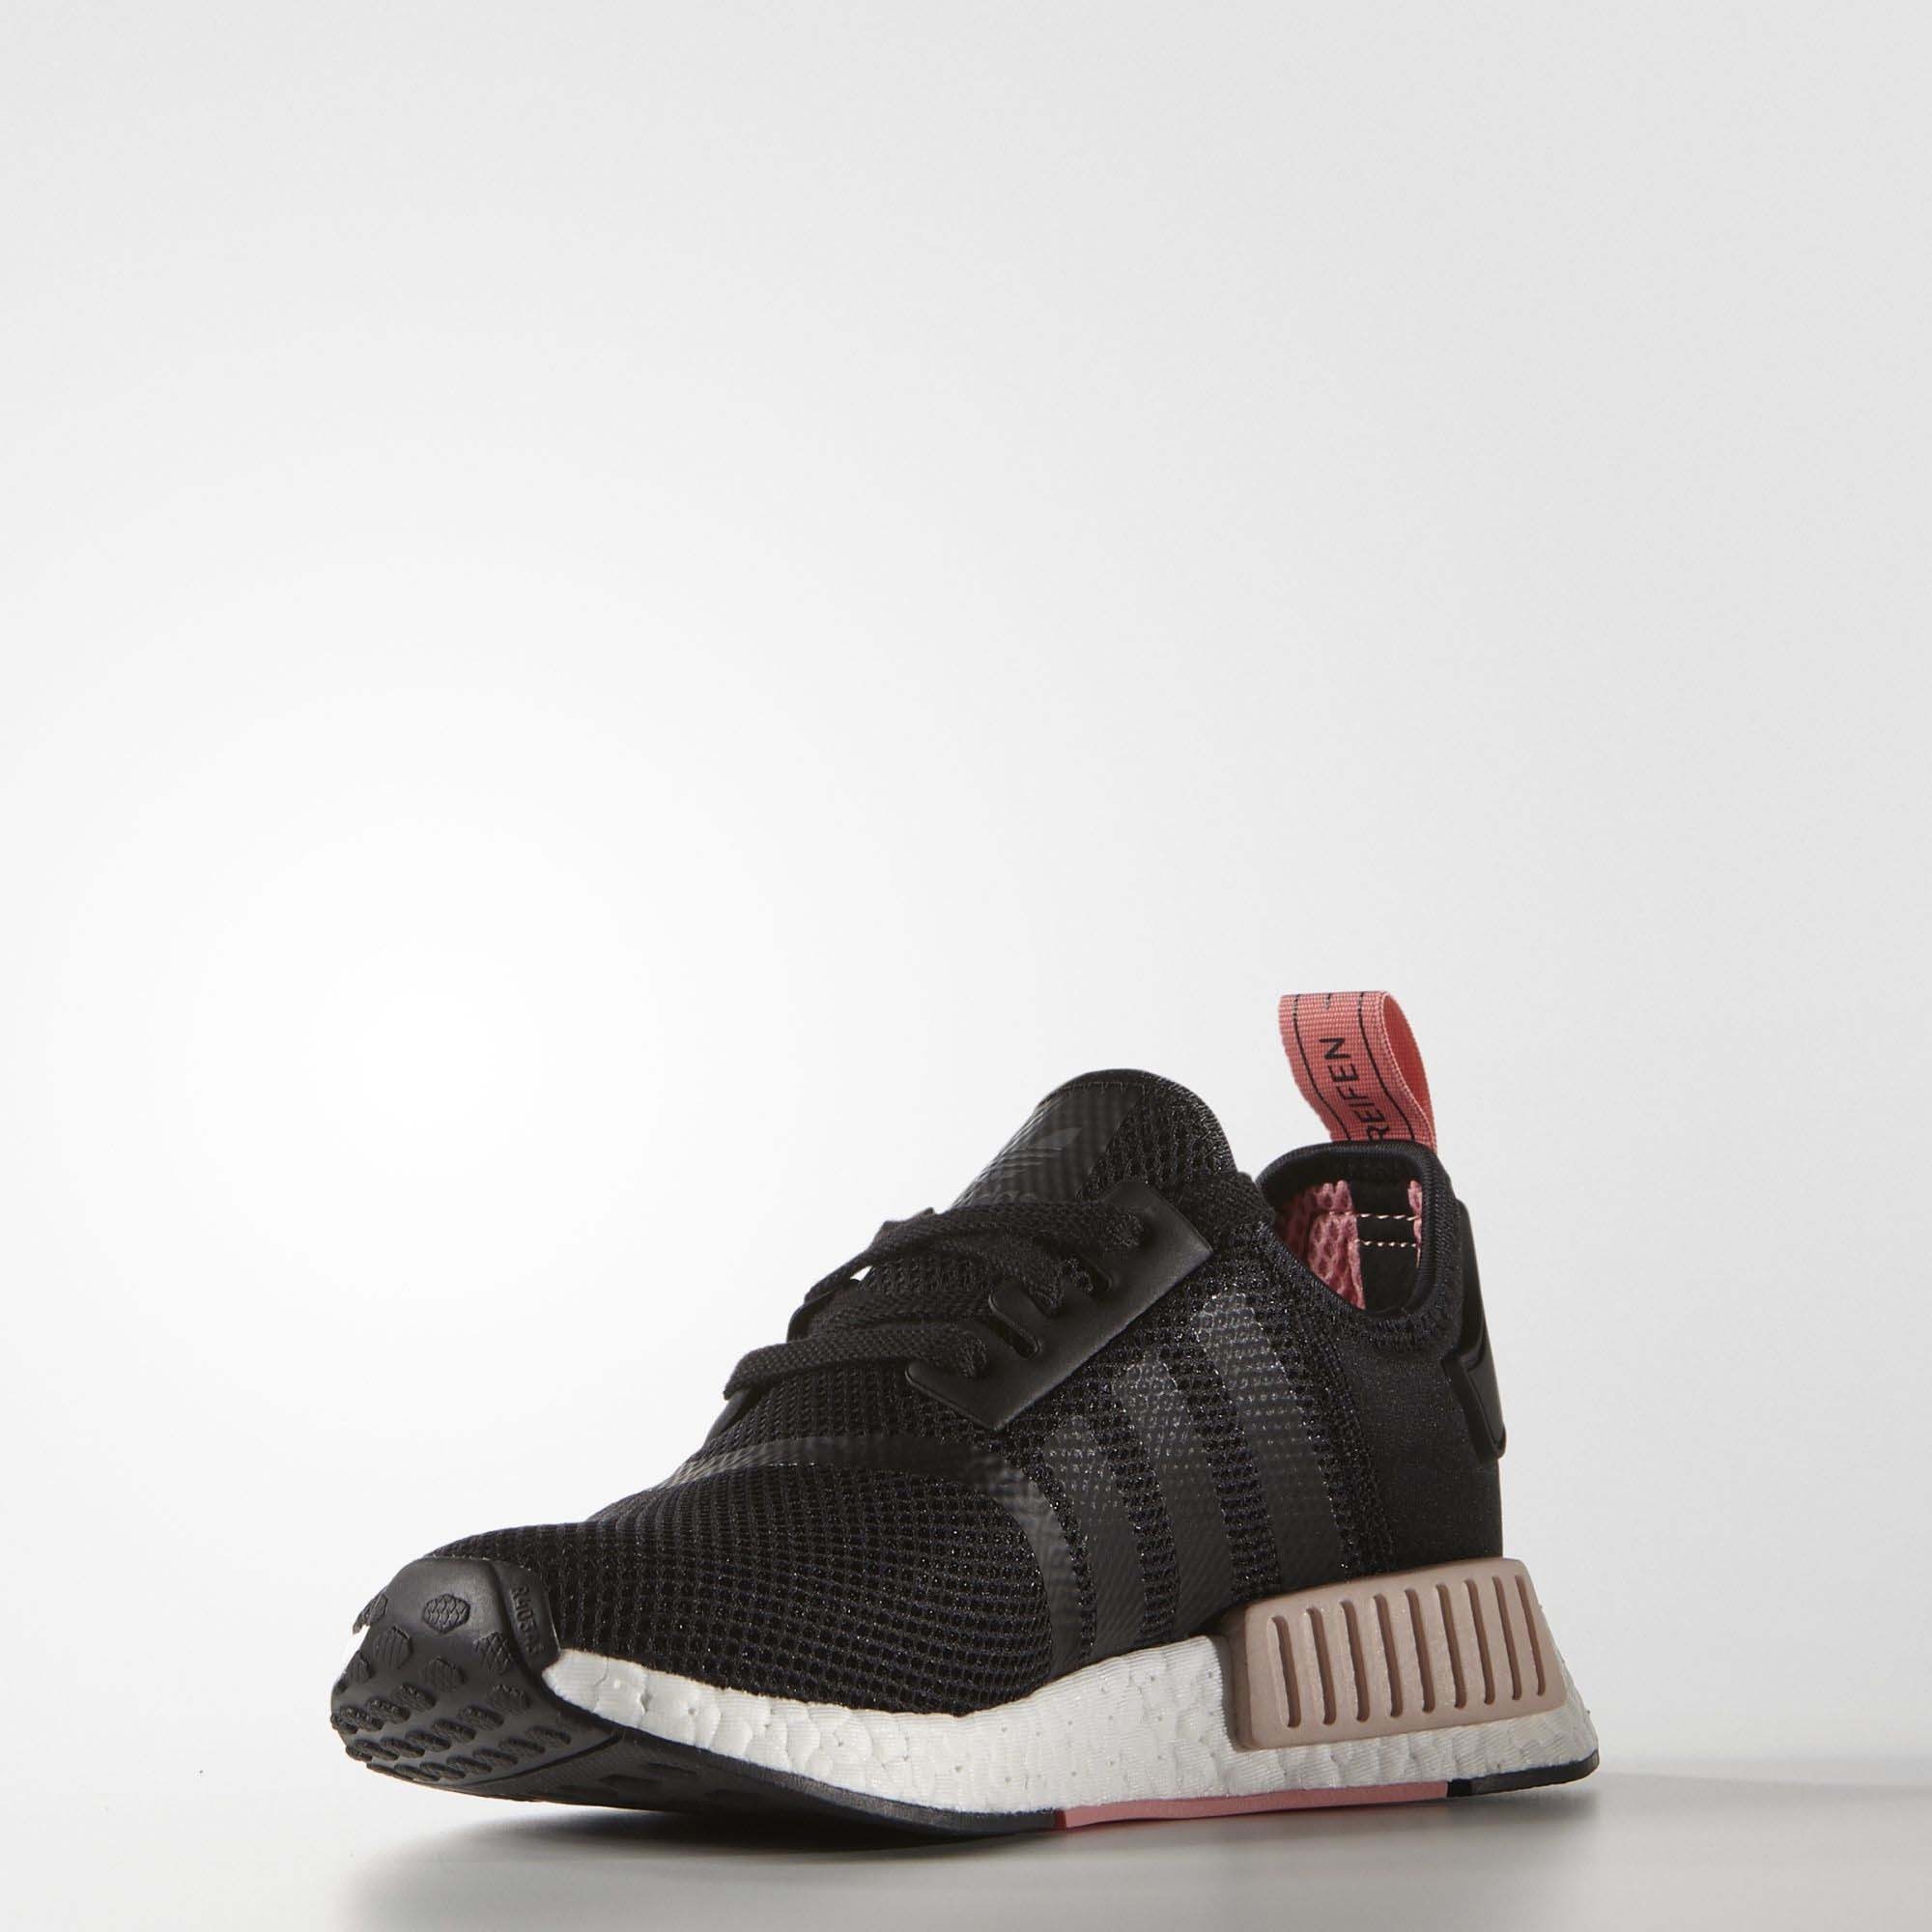 nmd soldes